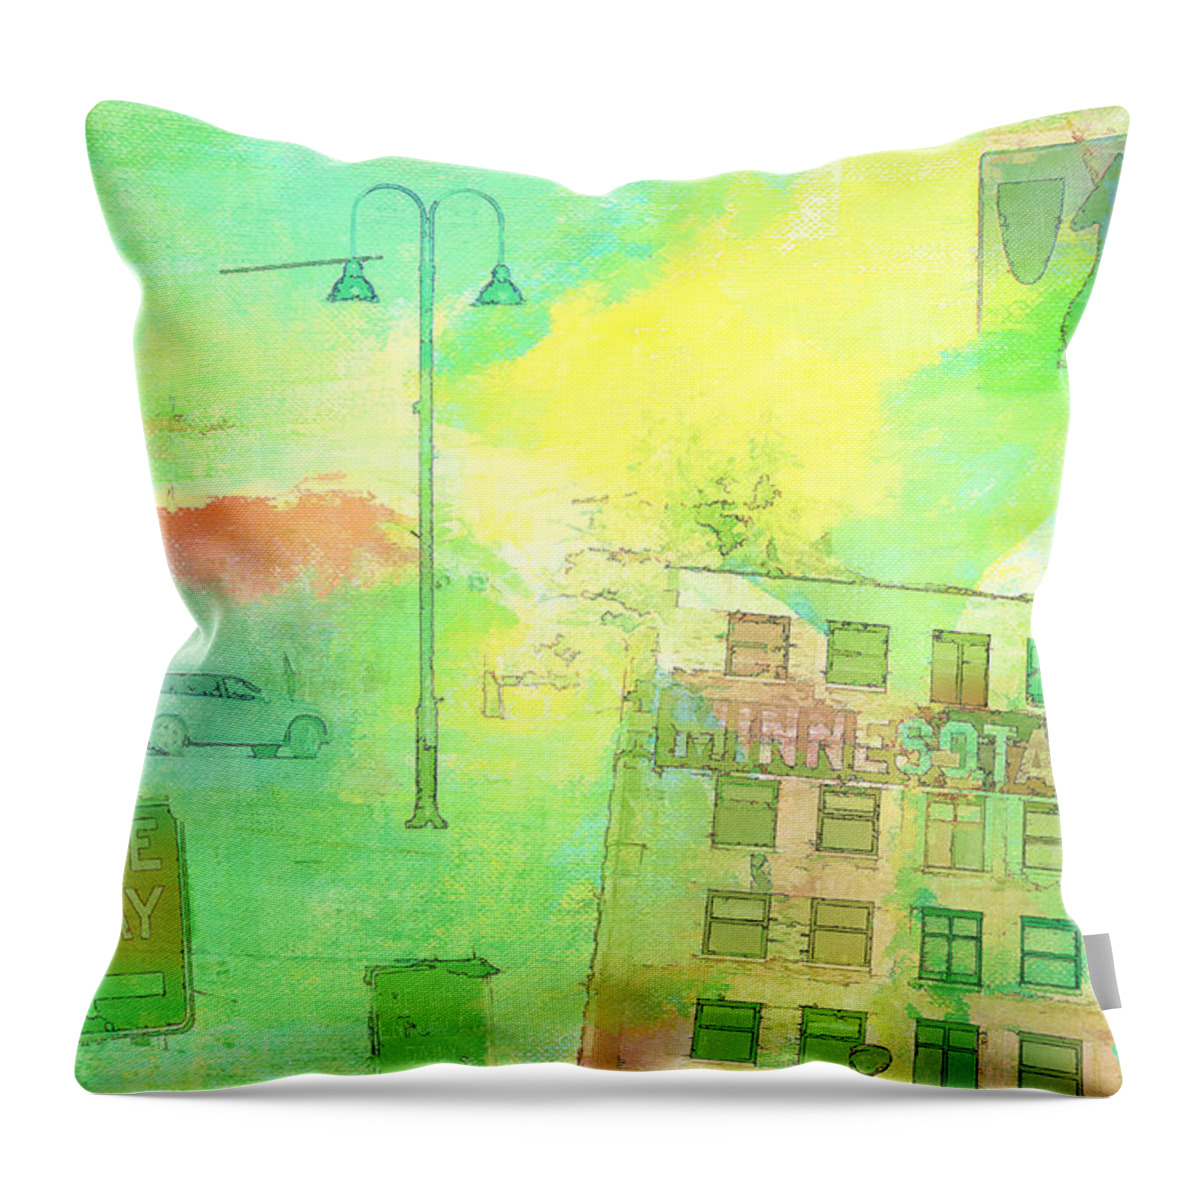 Minnesota Digital Art Throw Pillow featuring the photograph Going Places by Susan Stone